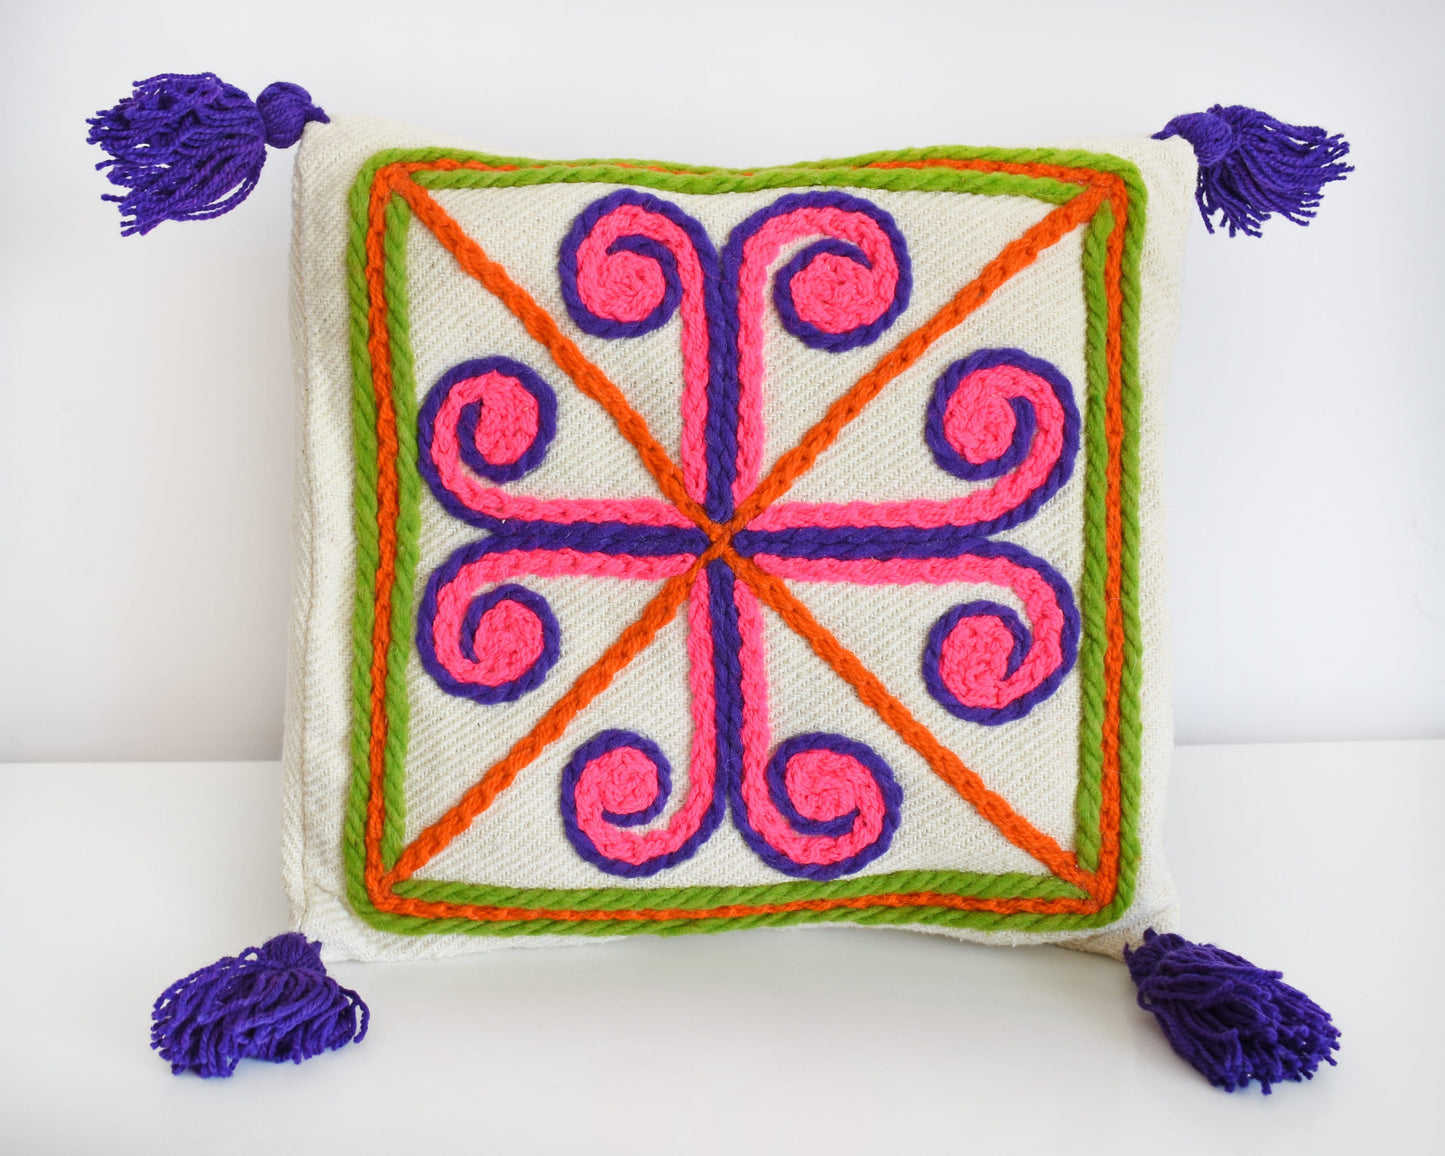 A vintage crewel embroidered pillow that has a curly cross with purple tassels.